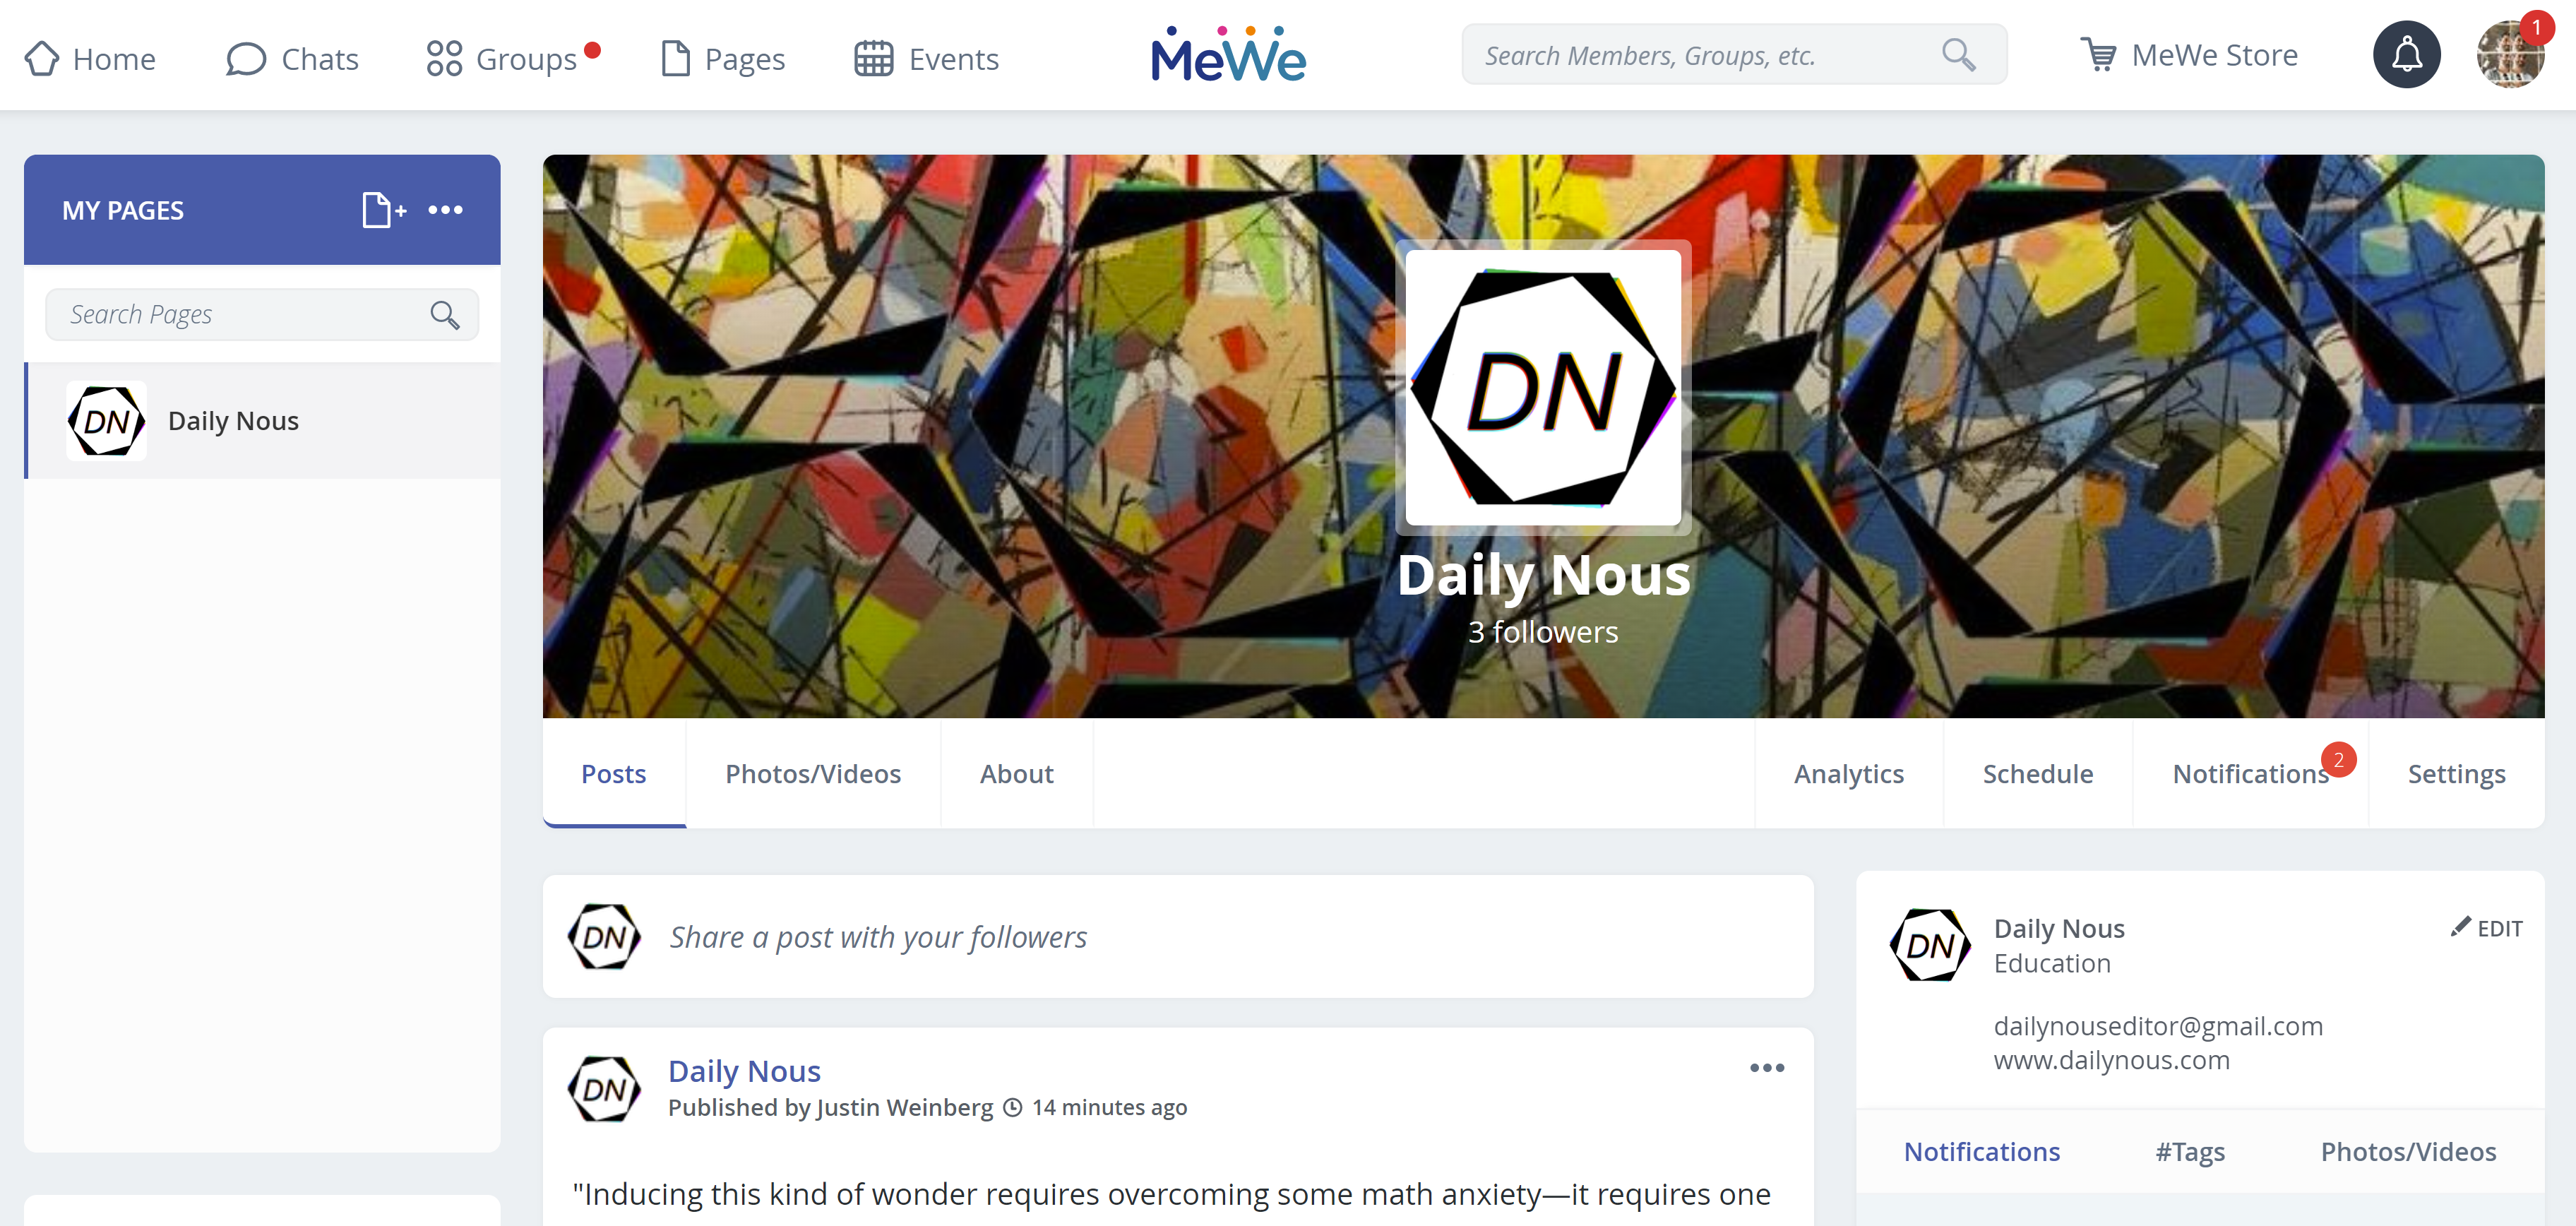 Moving to MeWe? - Daily Nous